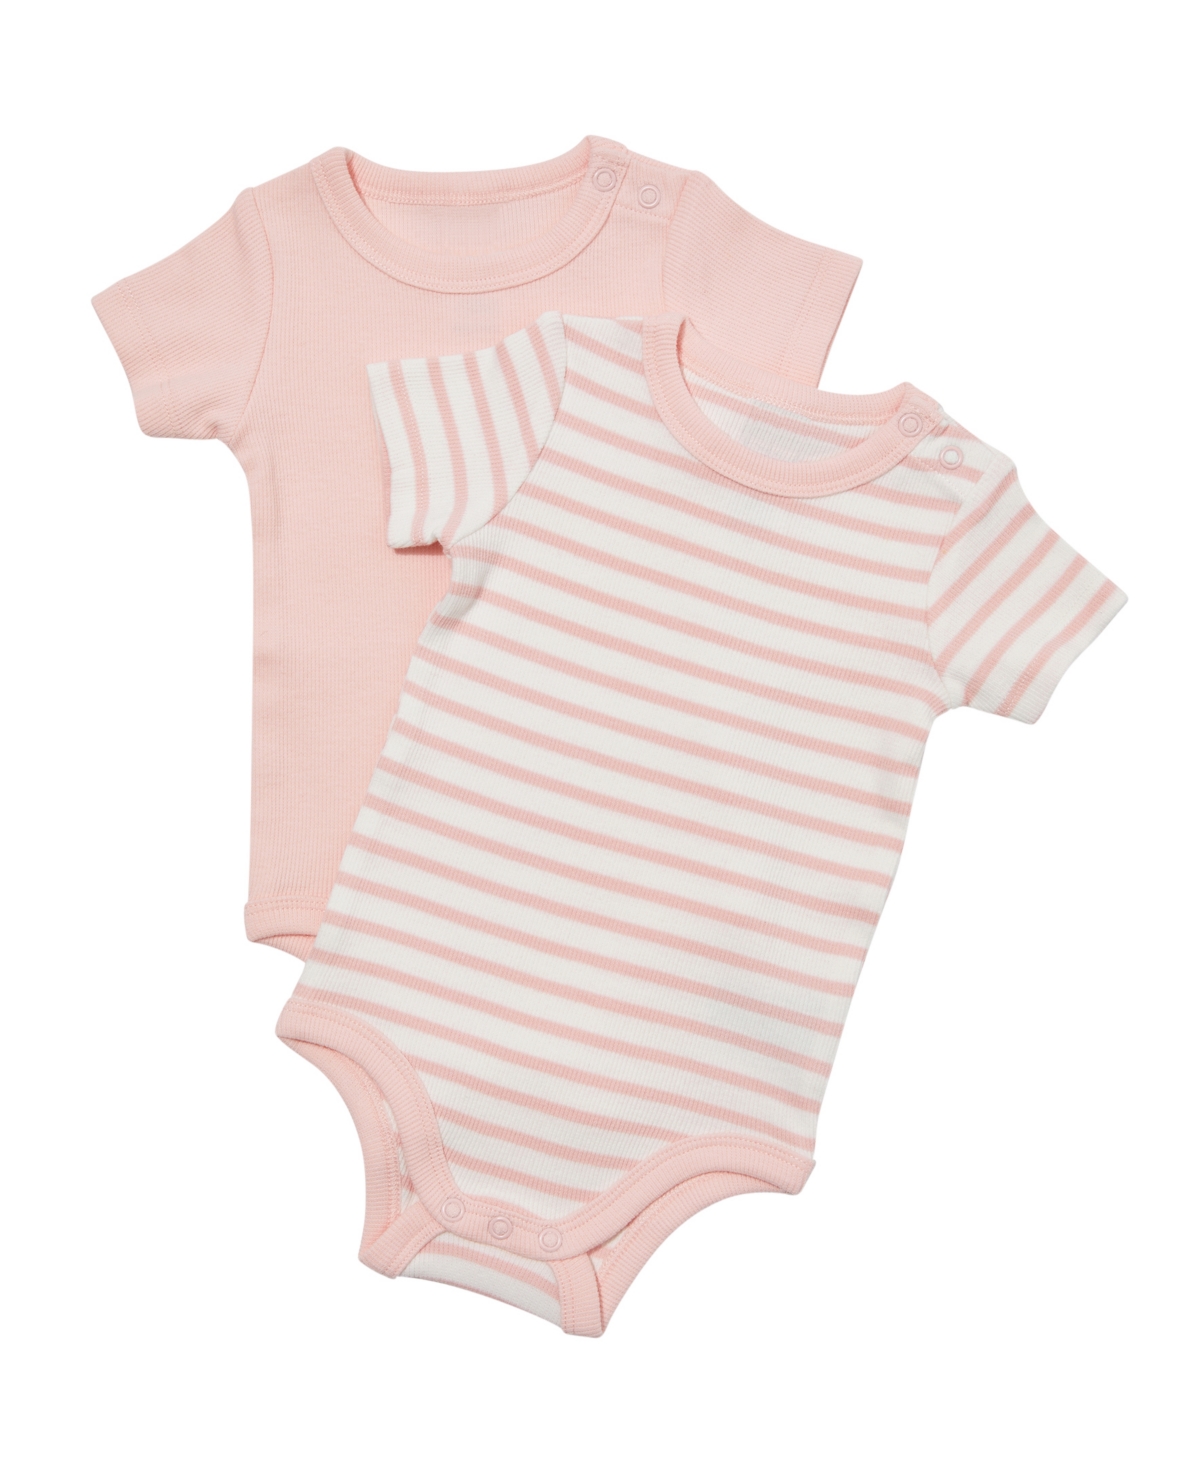 Cotton On Baby Boy Or Baby Girls Essentials Short Sleeve Bodysuit, Pack Of 2 In Pinky